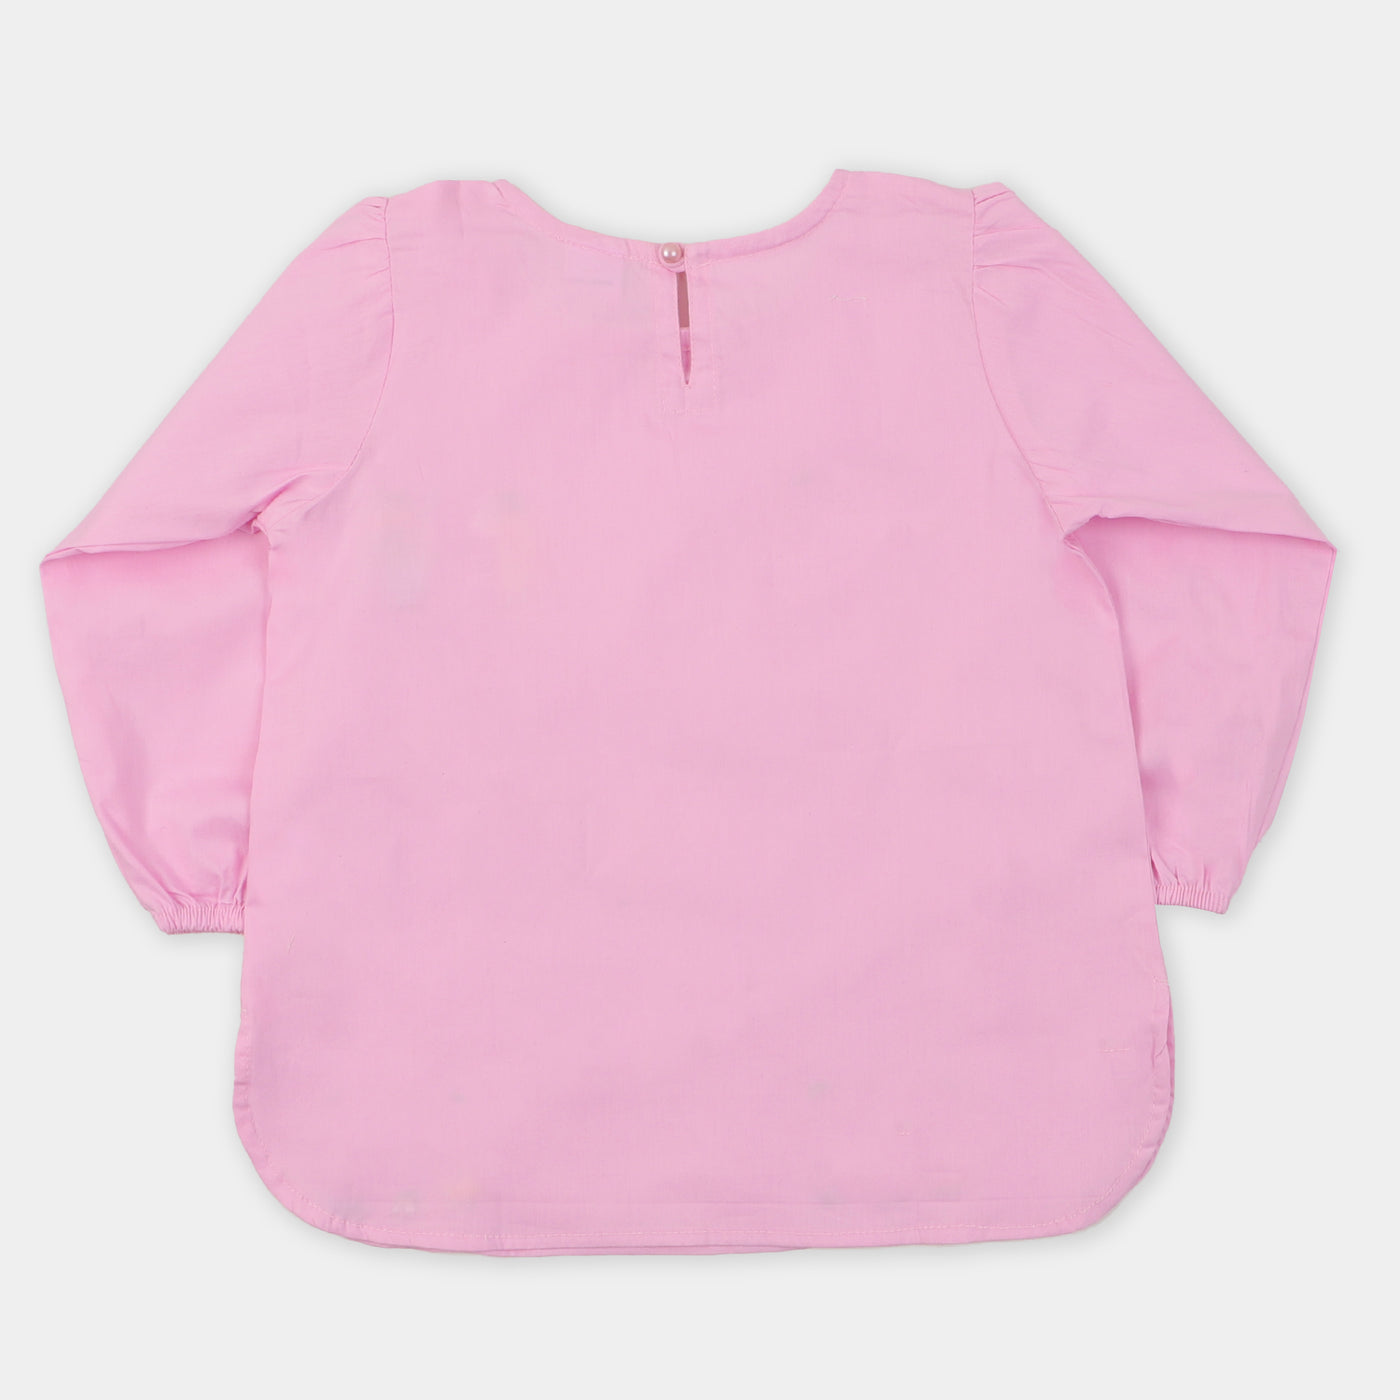 Girls Embroidered Top Friend - PINK